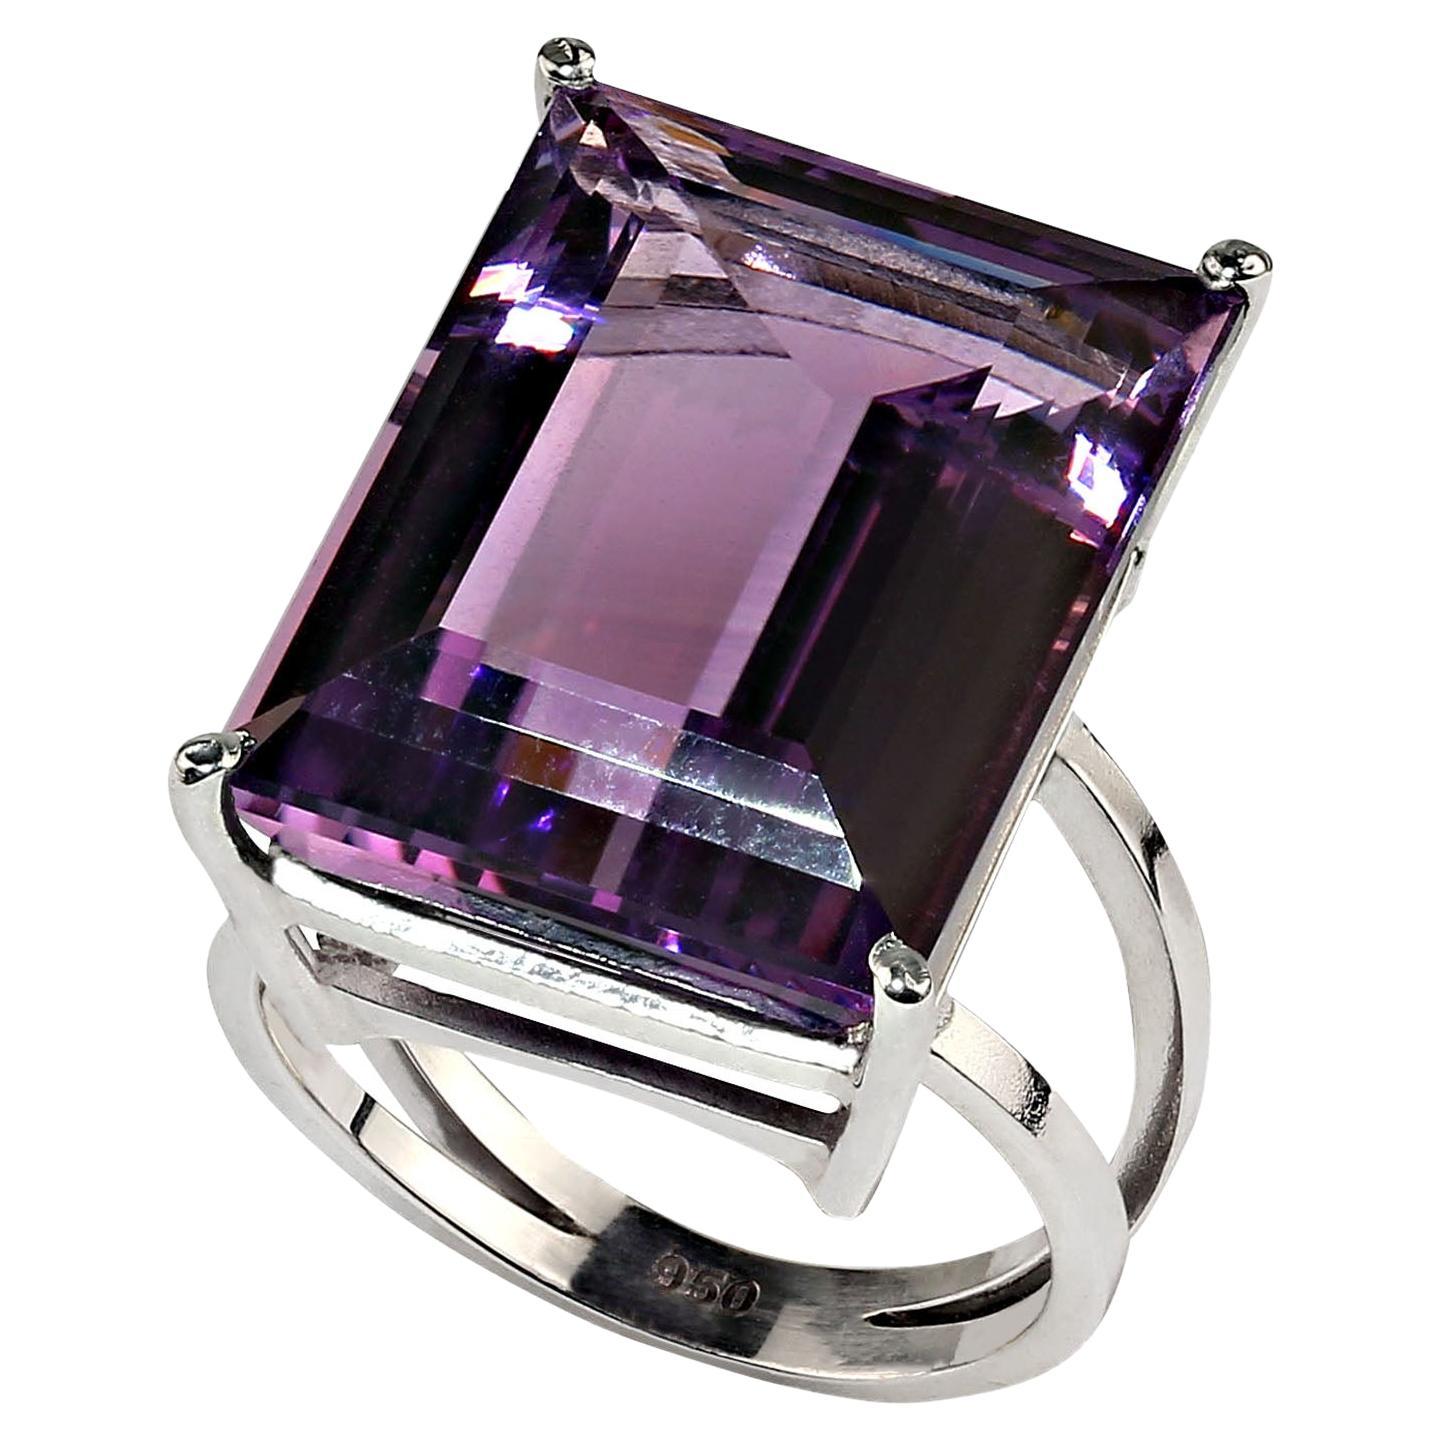 24.3CT Emerald cut Amethyst set in a handmade Sterling Silver ring.  This elegant ring was created by our favorite vendor is Belo Horizonte, Minas Gerais, Brasil. His craftmen handmade the unique basket style setting to perfectly fit this 20X15MM